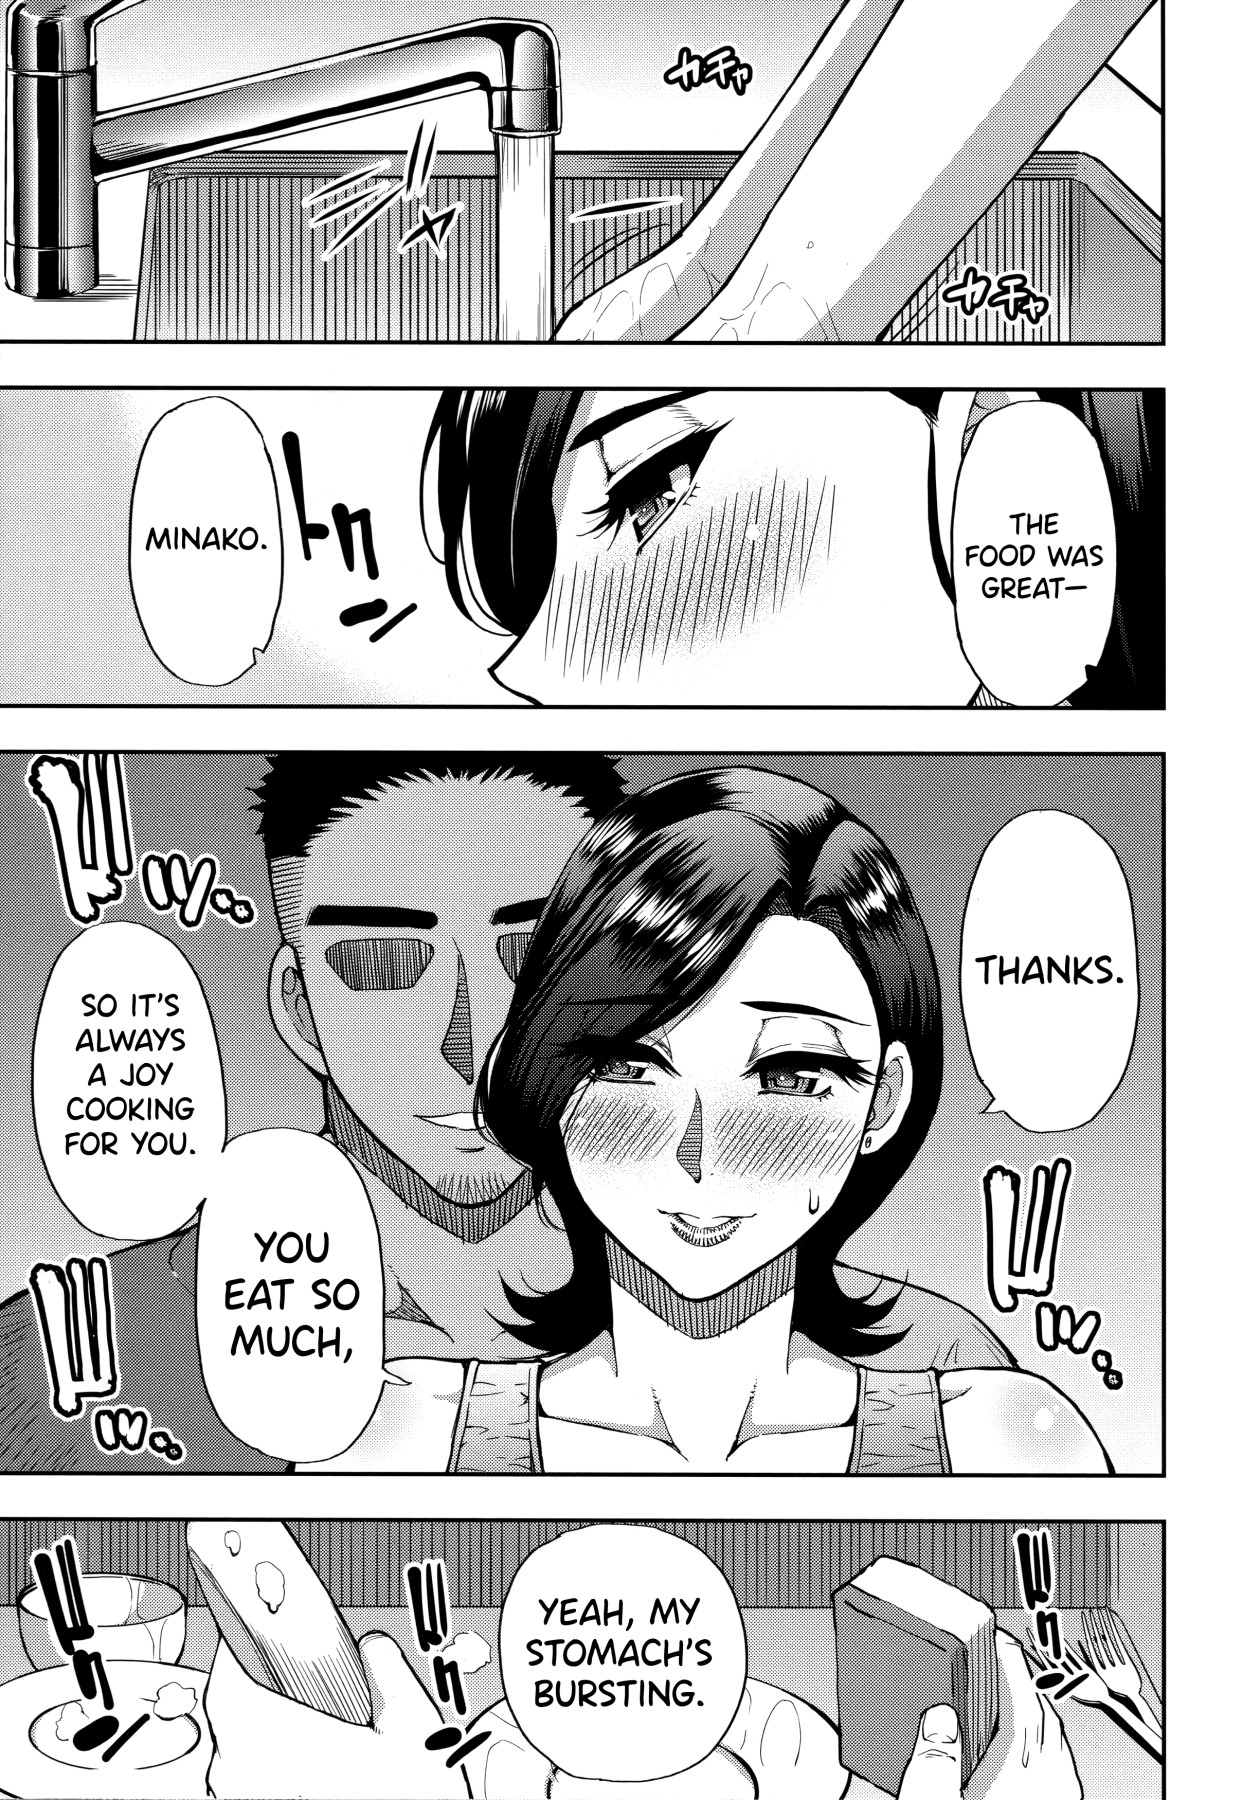 Hentai Manga Comic-Do Anything You Like To Me In Her Place-Chapter 2-3